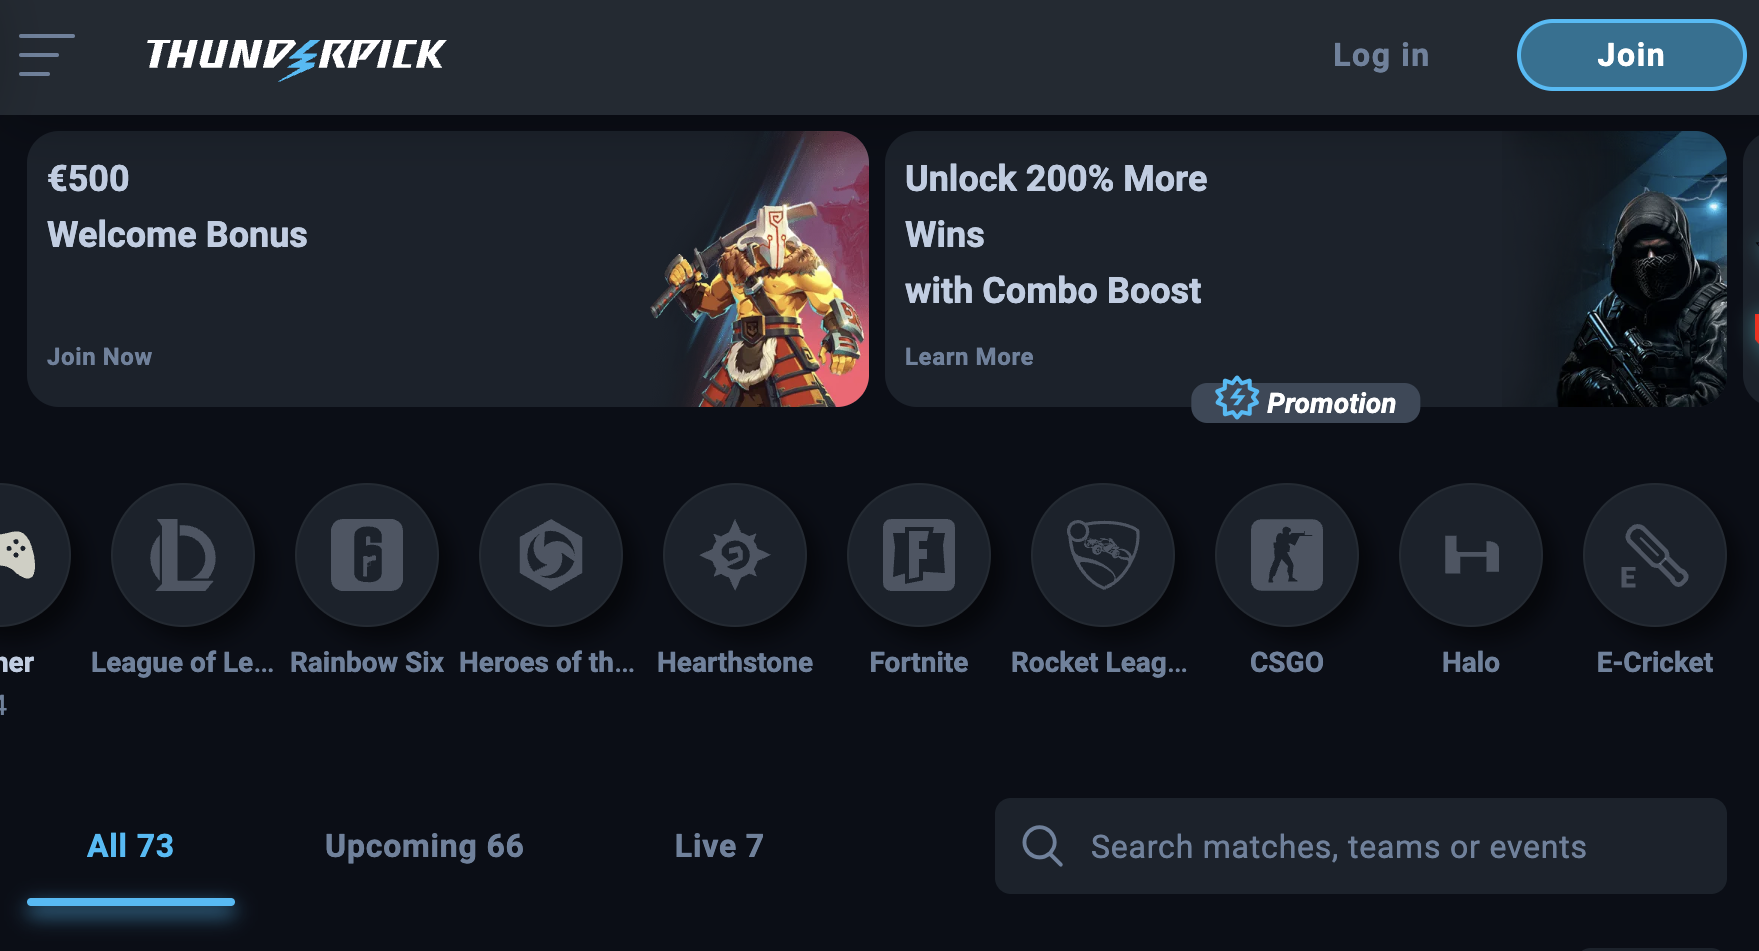 Thunderpick - Esports Betting Platform Featuring a Combo Boost for ESports Bettors